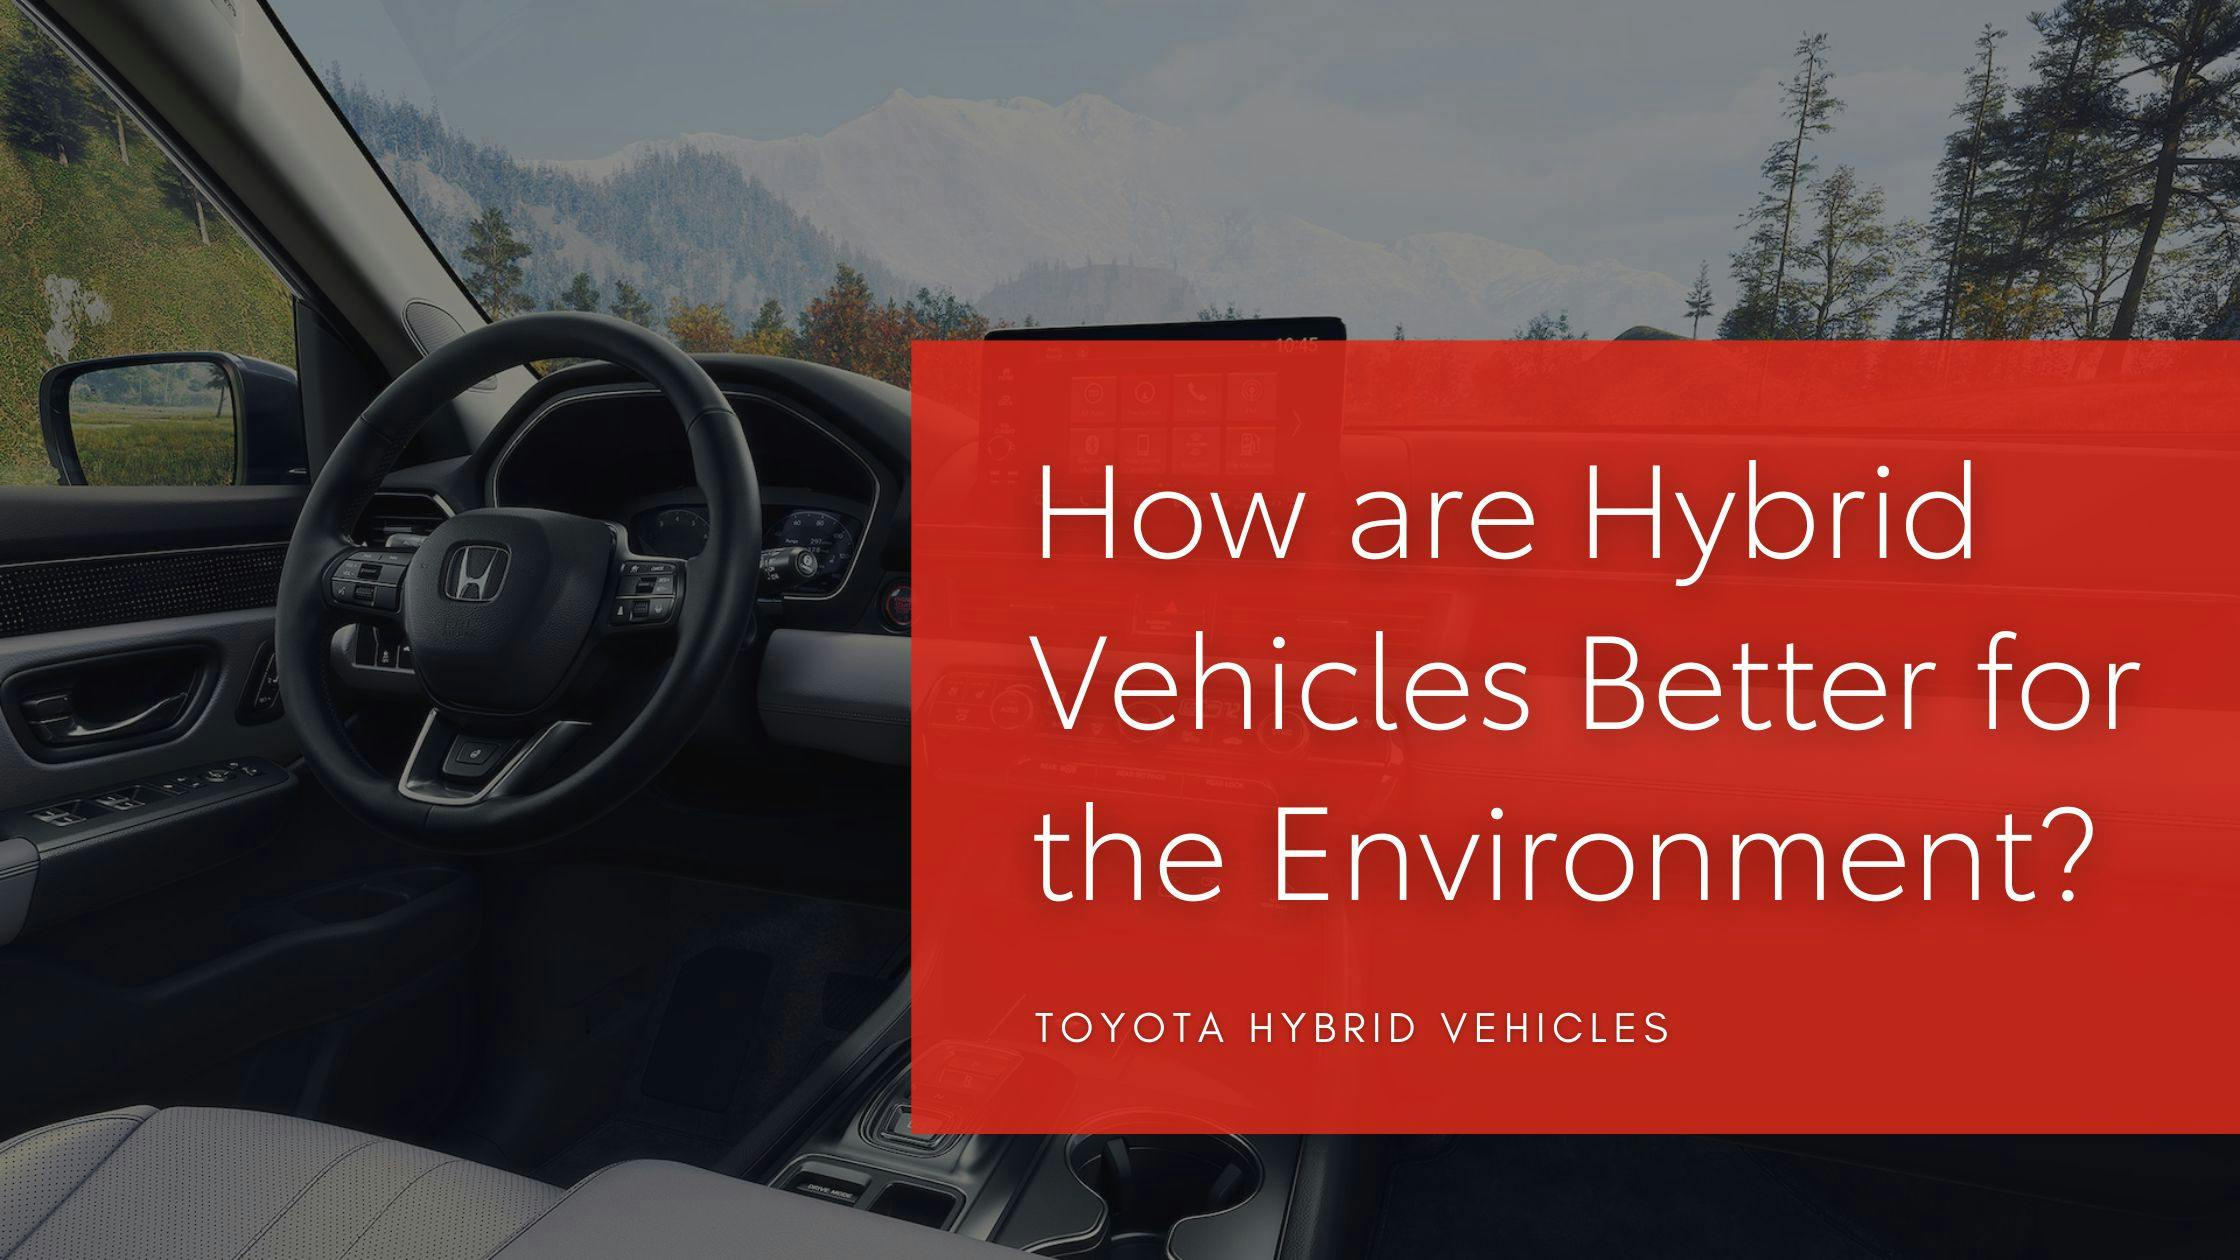 How are Hybrid Vehicles Better for the Environment